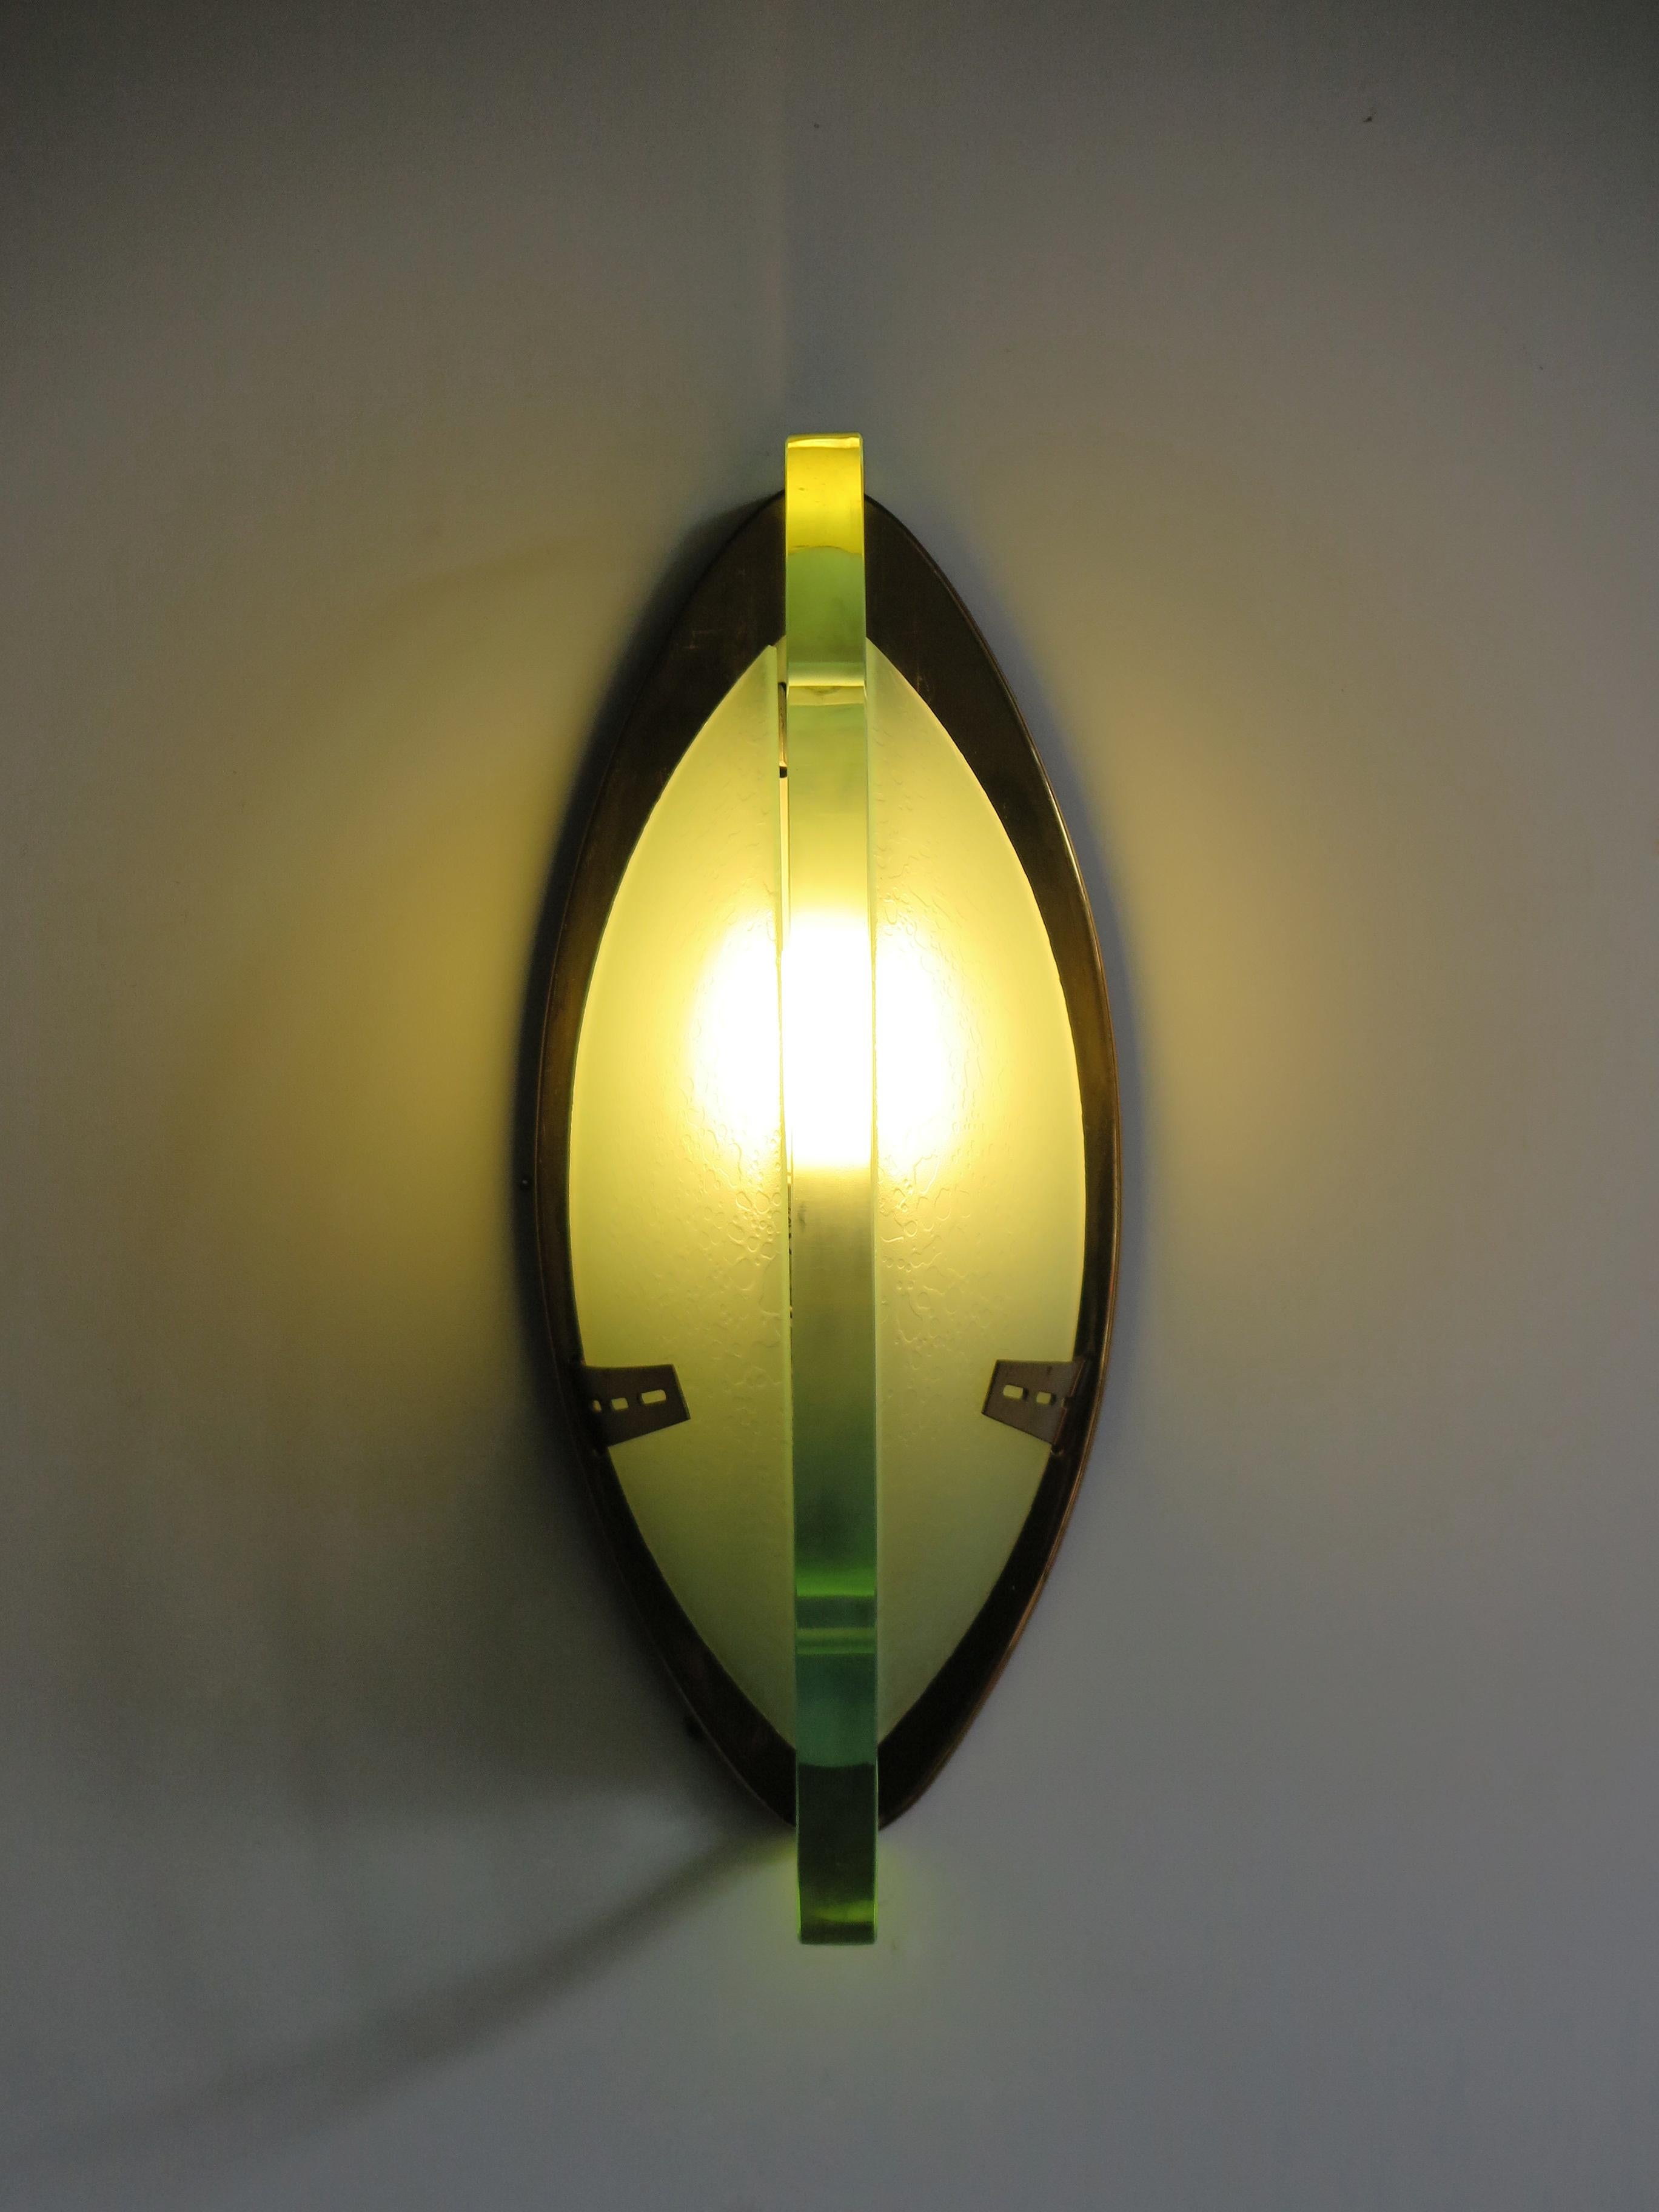 Midcentury modern design big italian sconce wall lamp designed by Max Ingrand for Fontana Arte, with brass frame and thickly ground crystal and frosted glass diffusers, Italy 1960s

Bibliography:
Franco Deboni Fontana Arte
Gio Ponti, Pietro